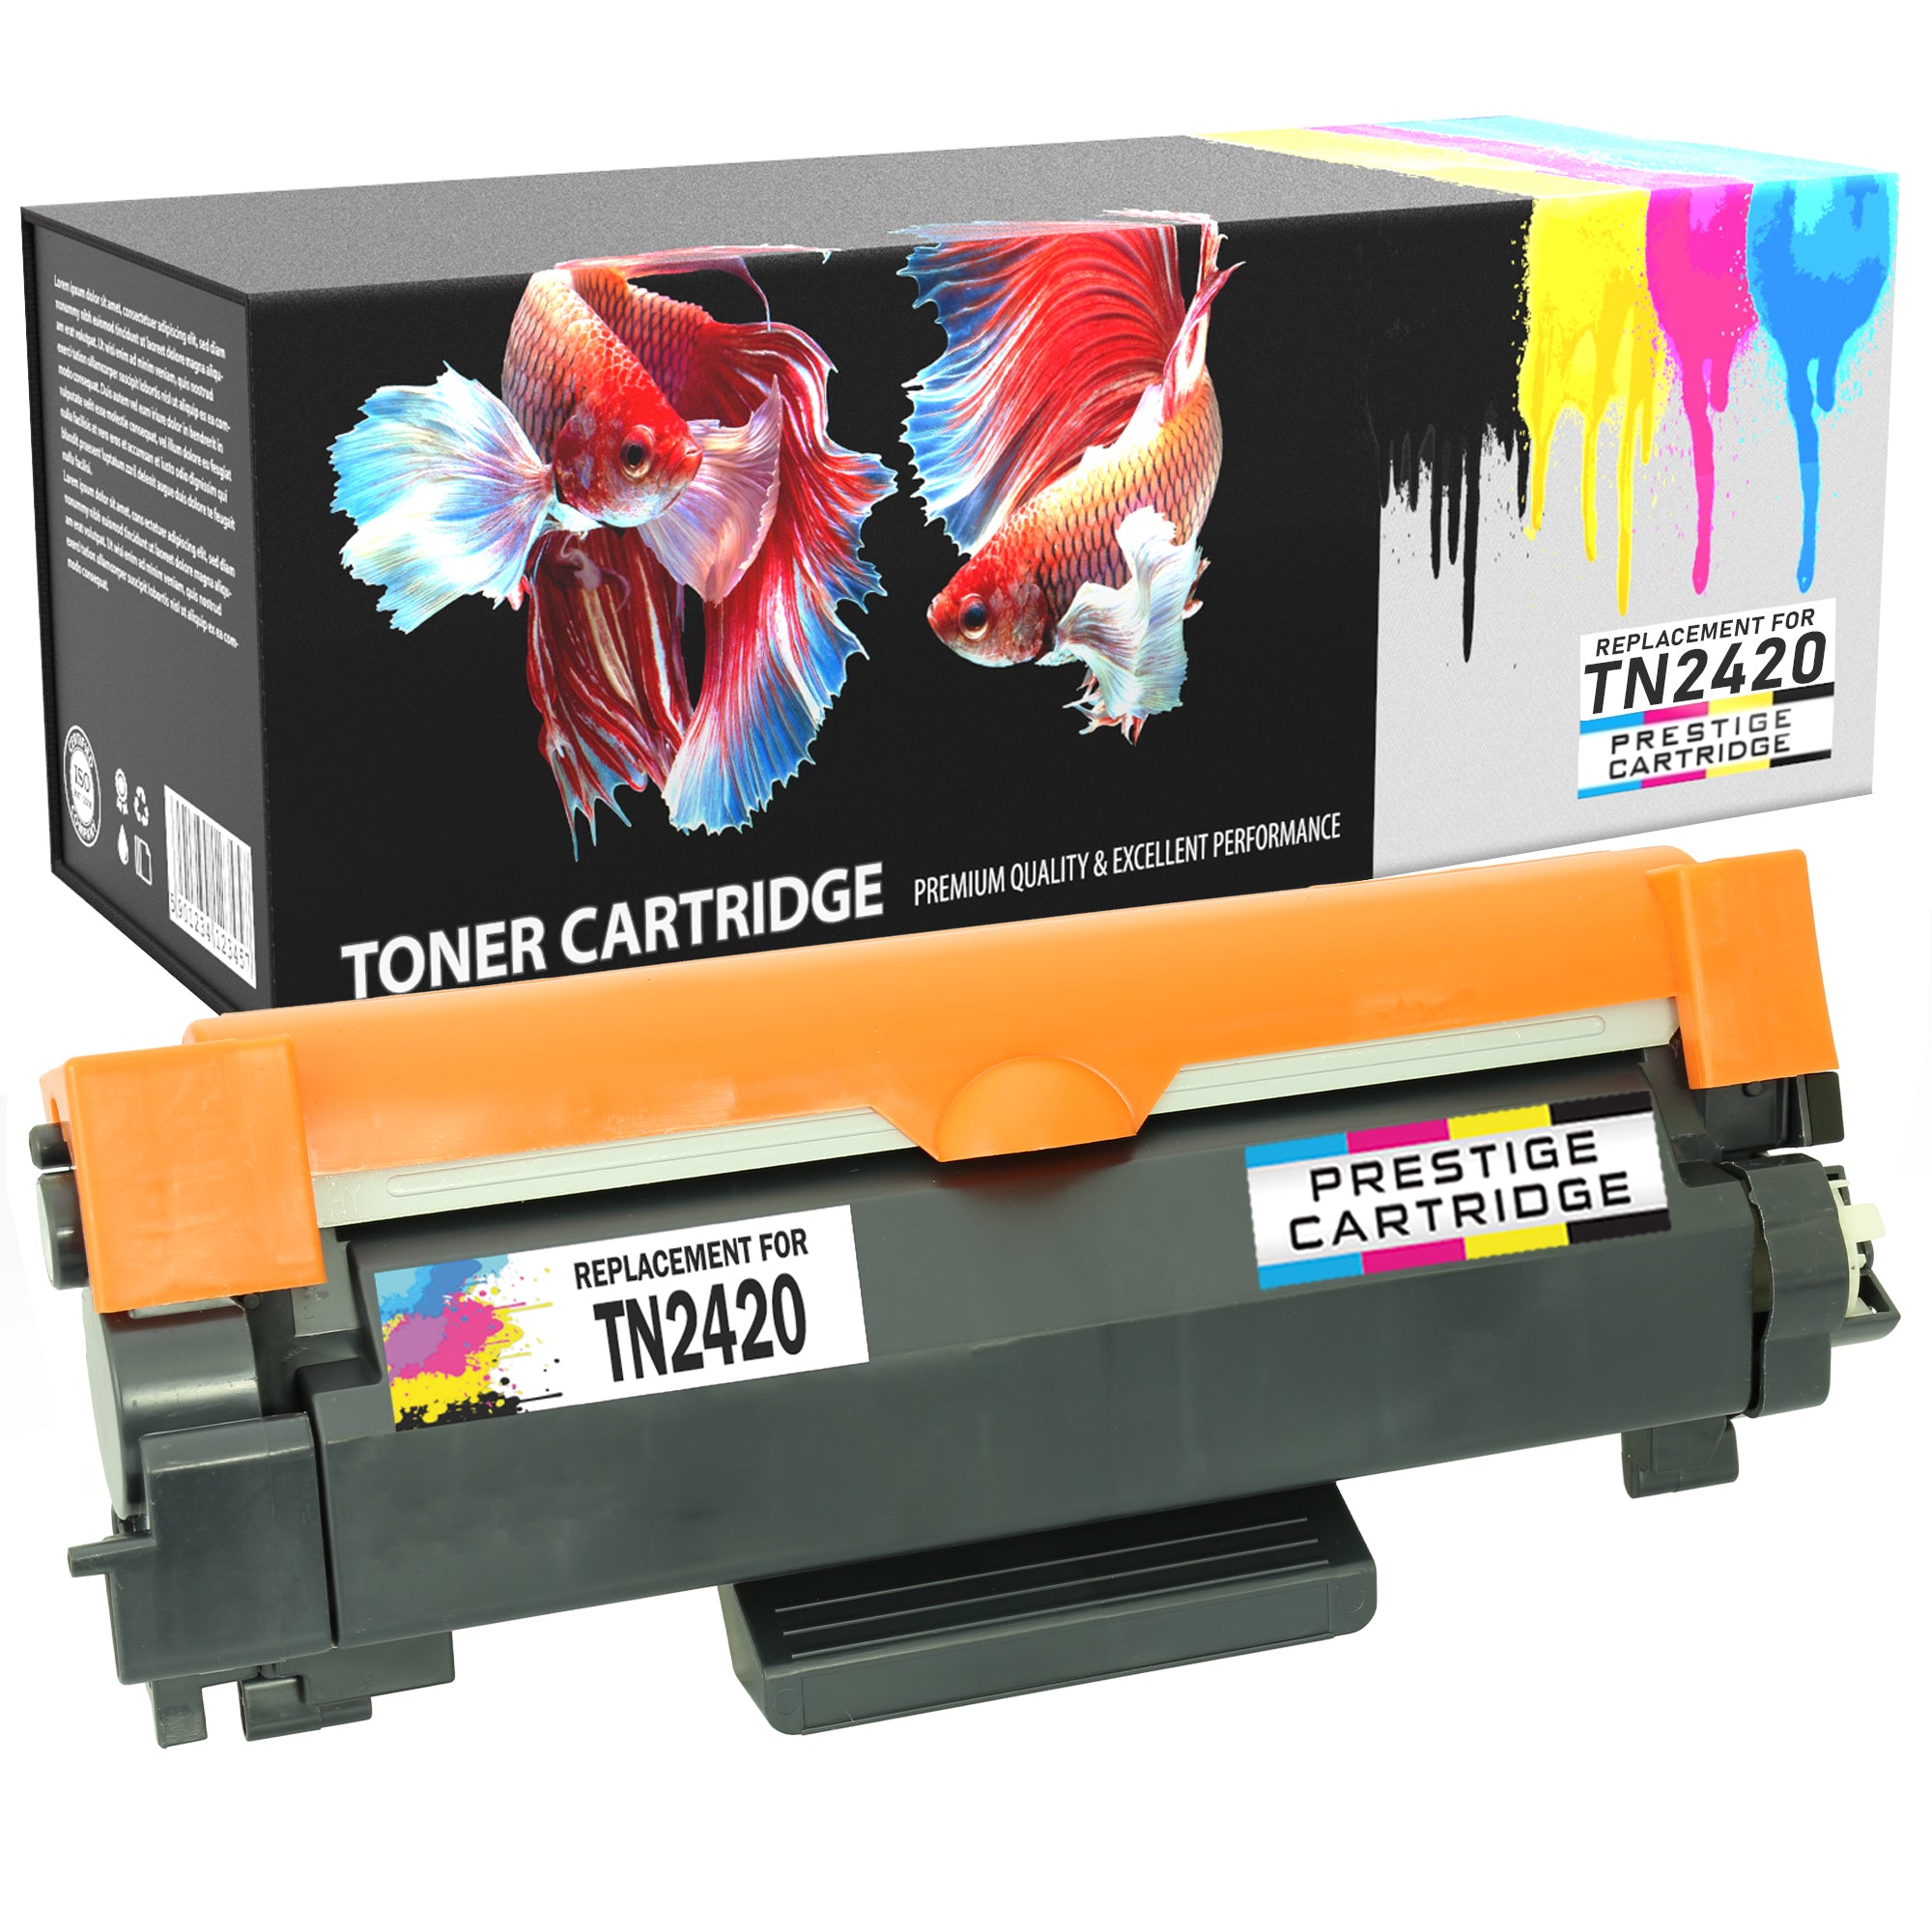 Toner Cartridge Replace FOR Brother DCP-L2510D DCP-L2530DW DCP-L2537DW  DCP-L2550DN HL-L2310D HL-L2350DW HL-L2357DW HL-L2370DN